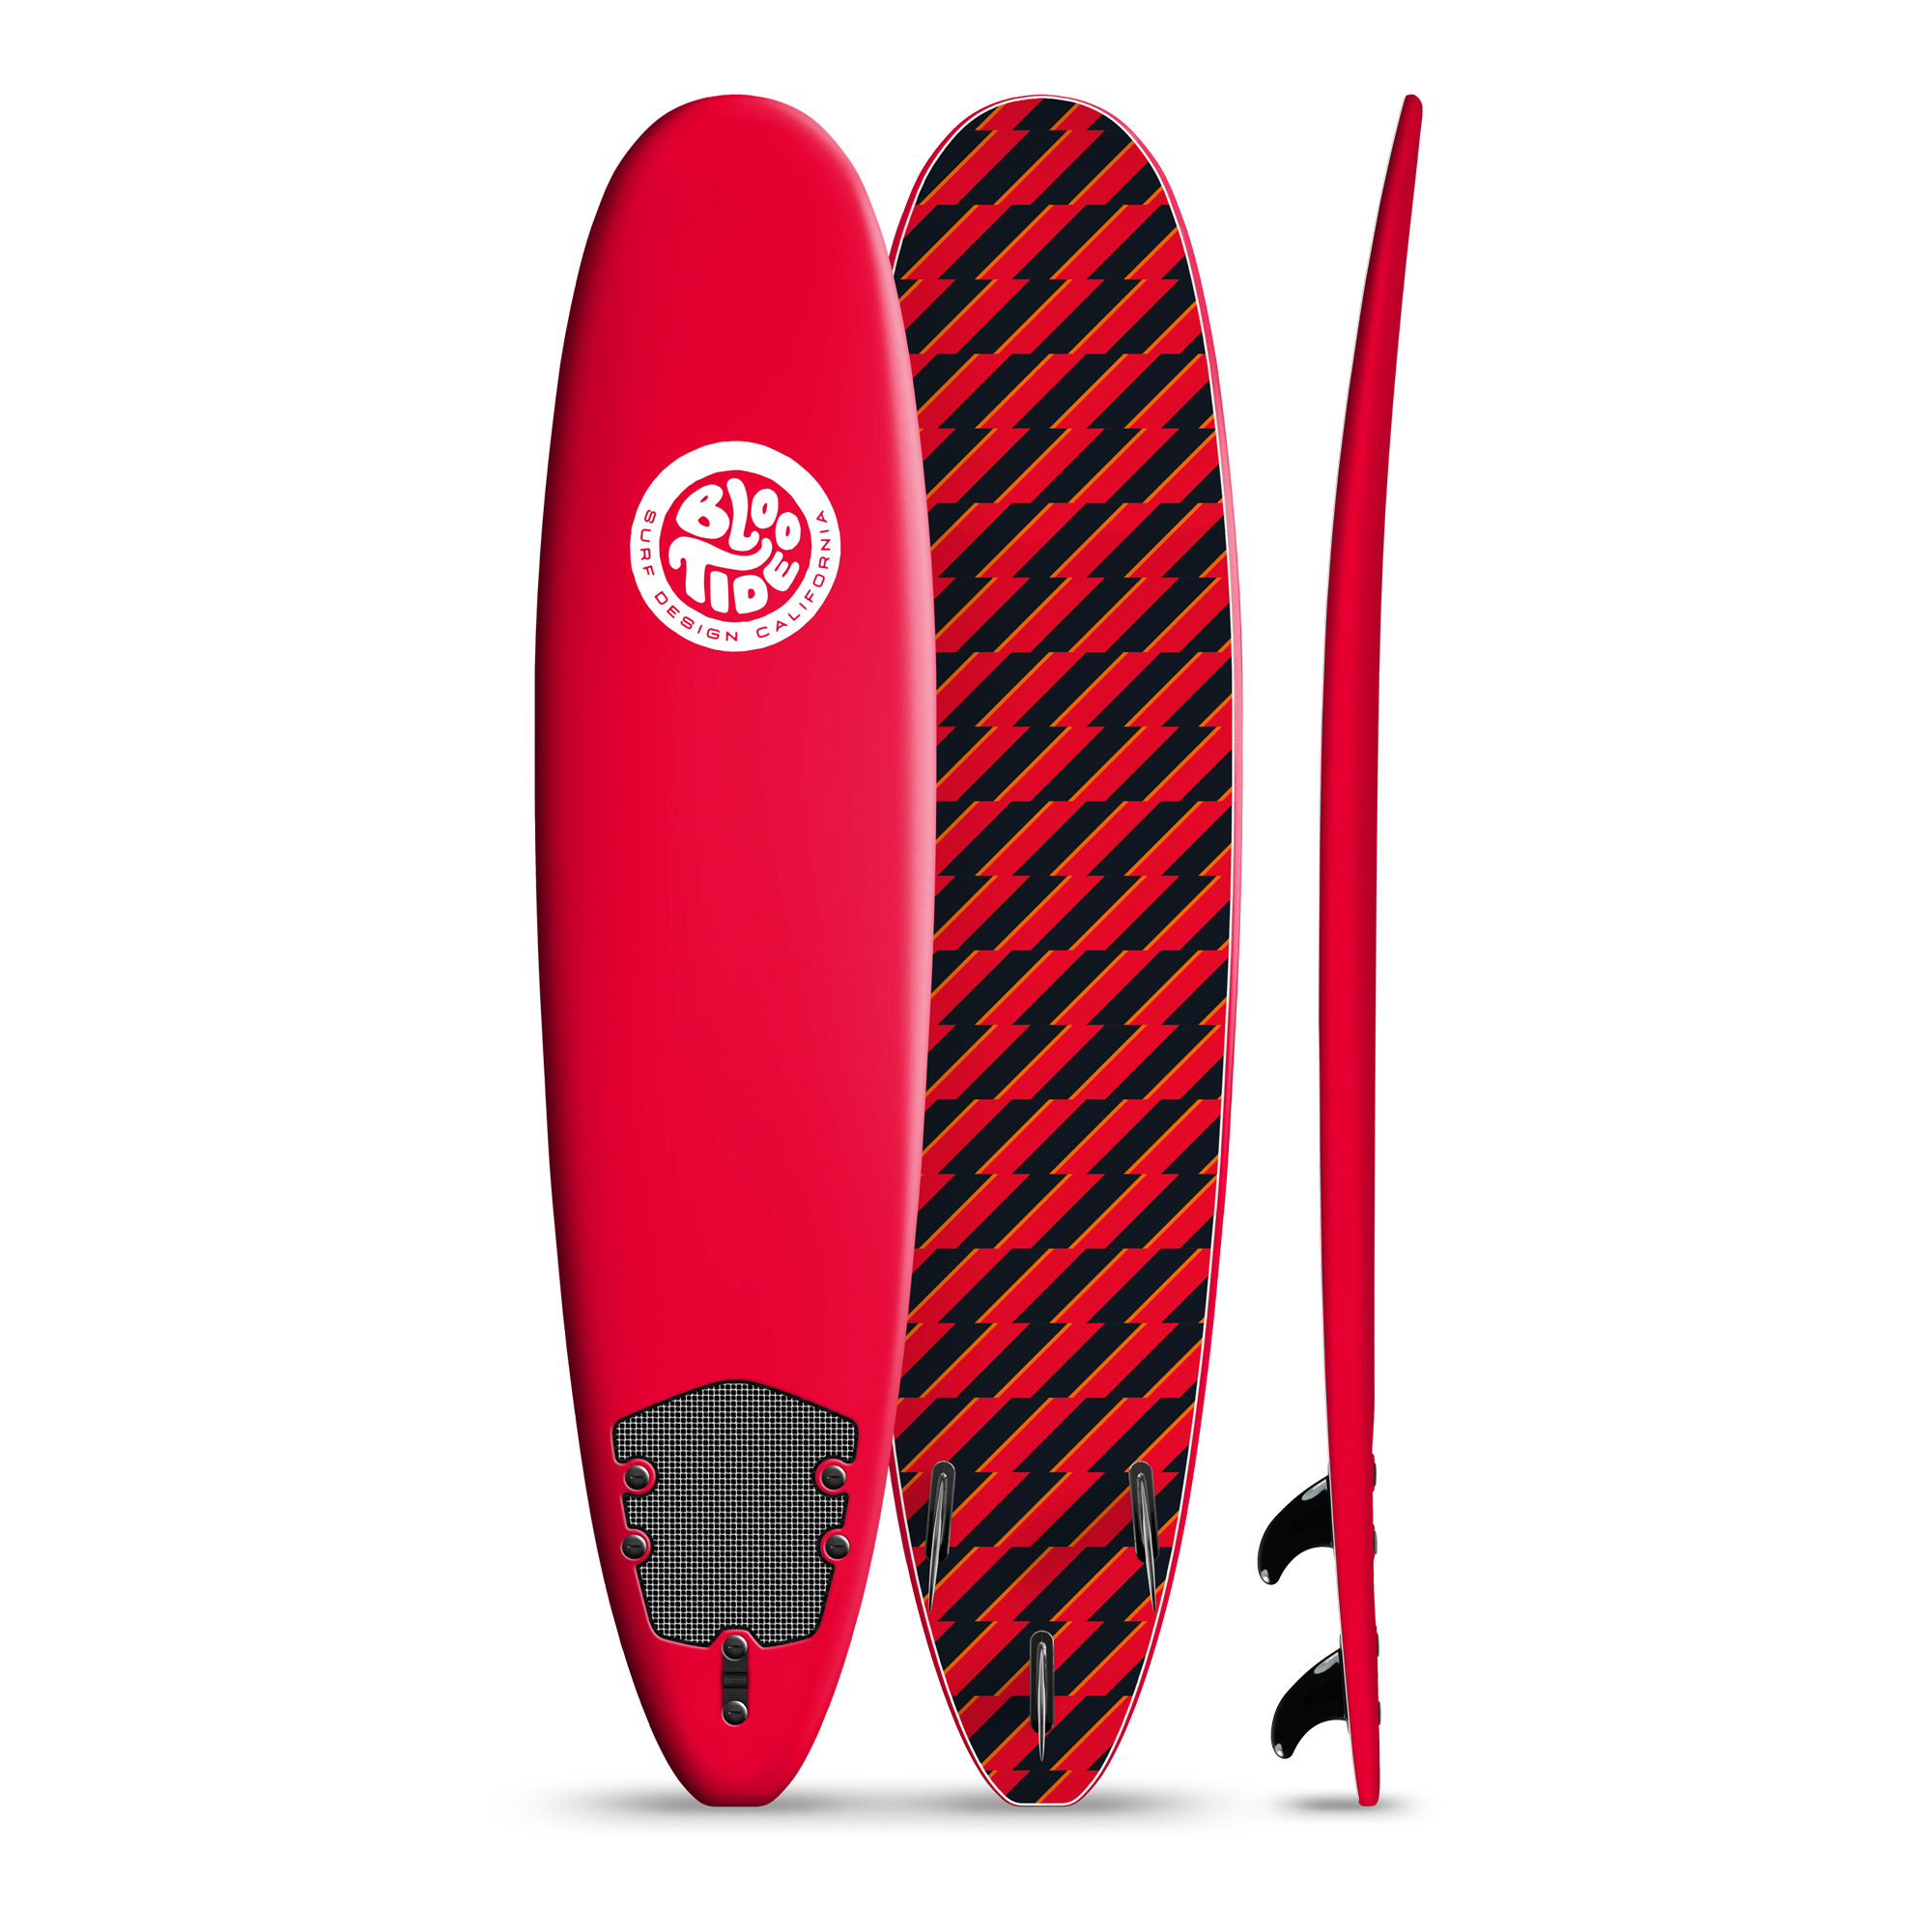 Bloo Tide Red 8 foot Soft Top Surfboard